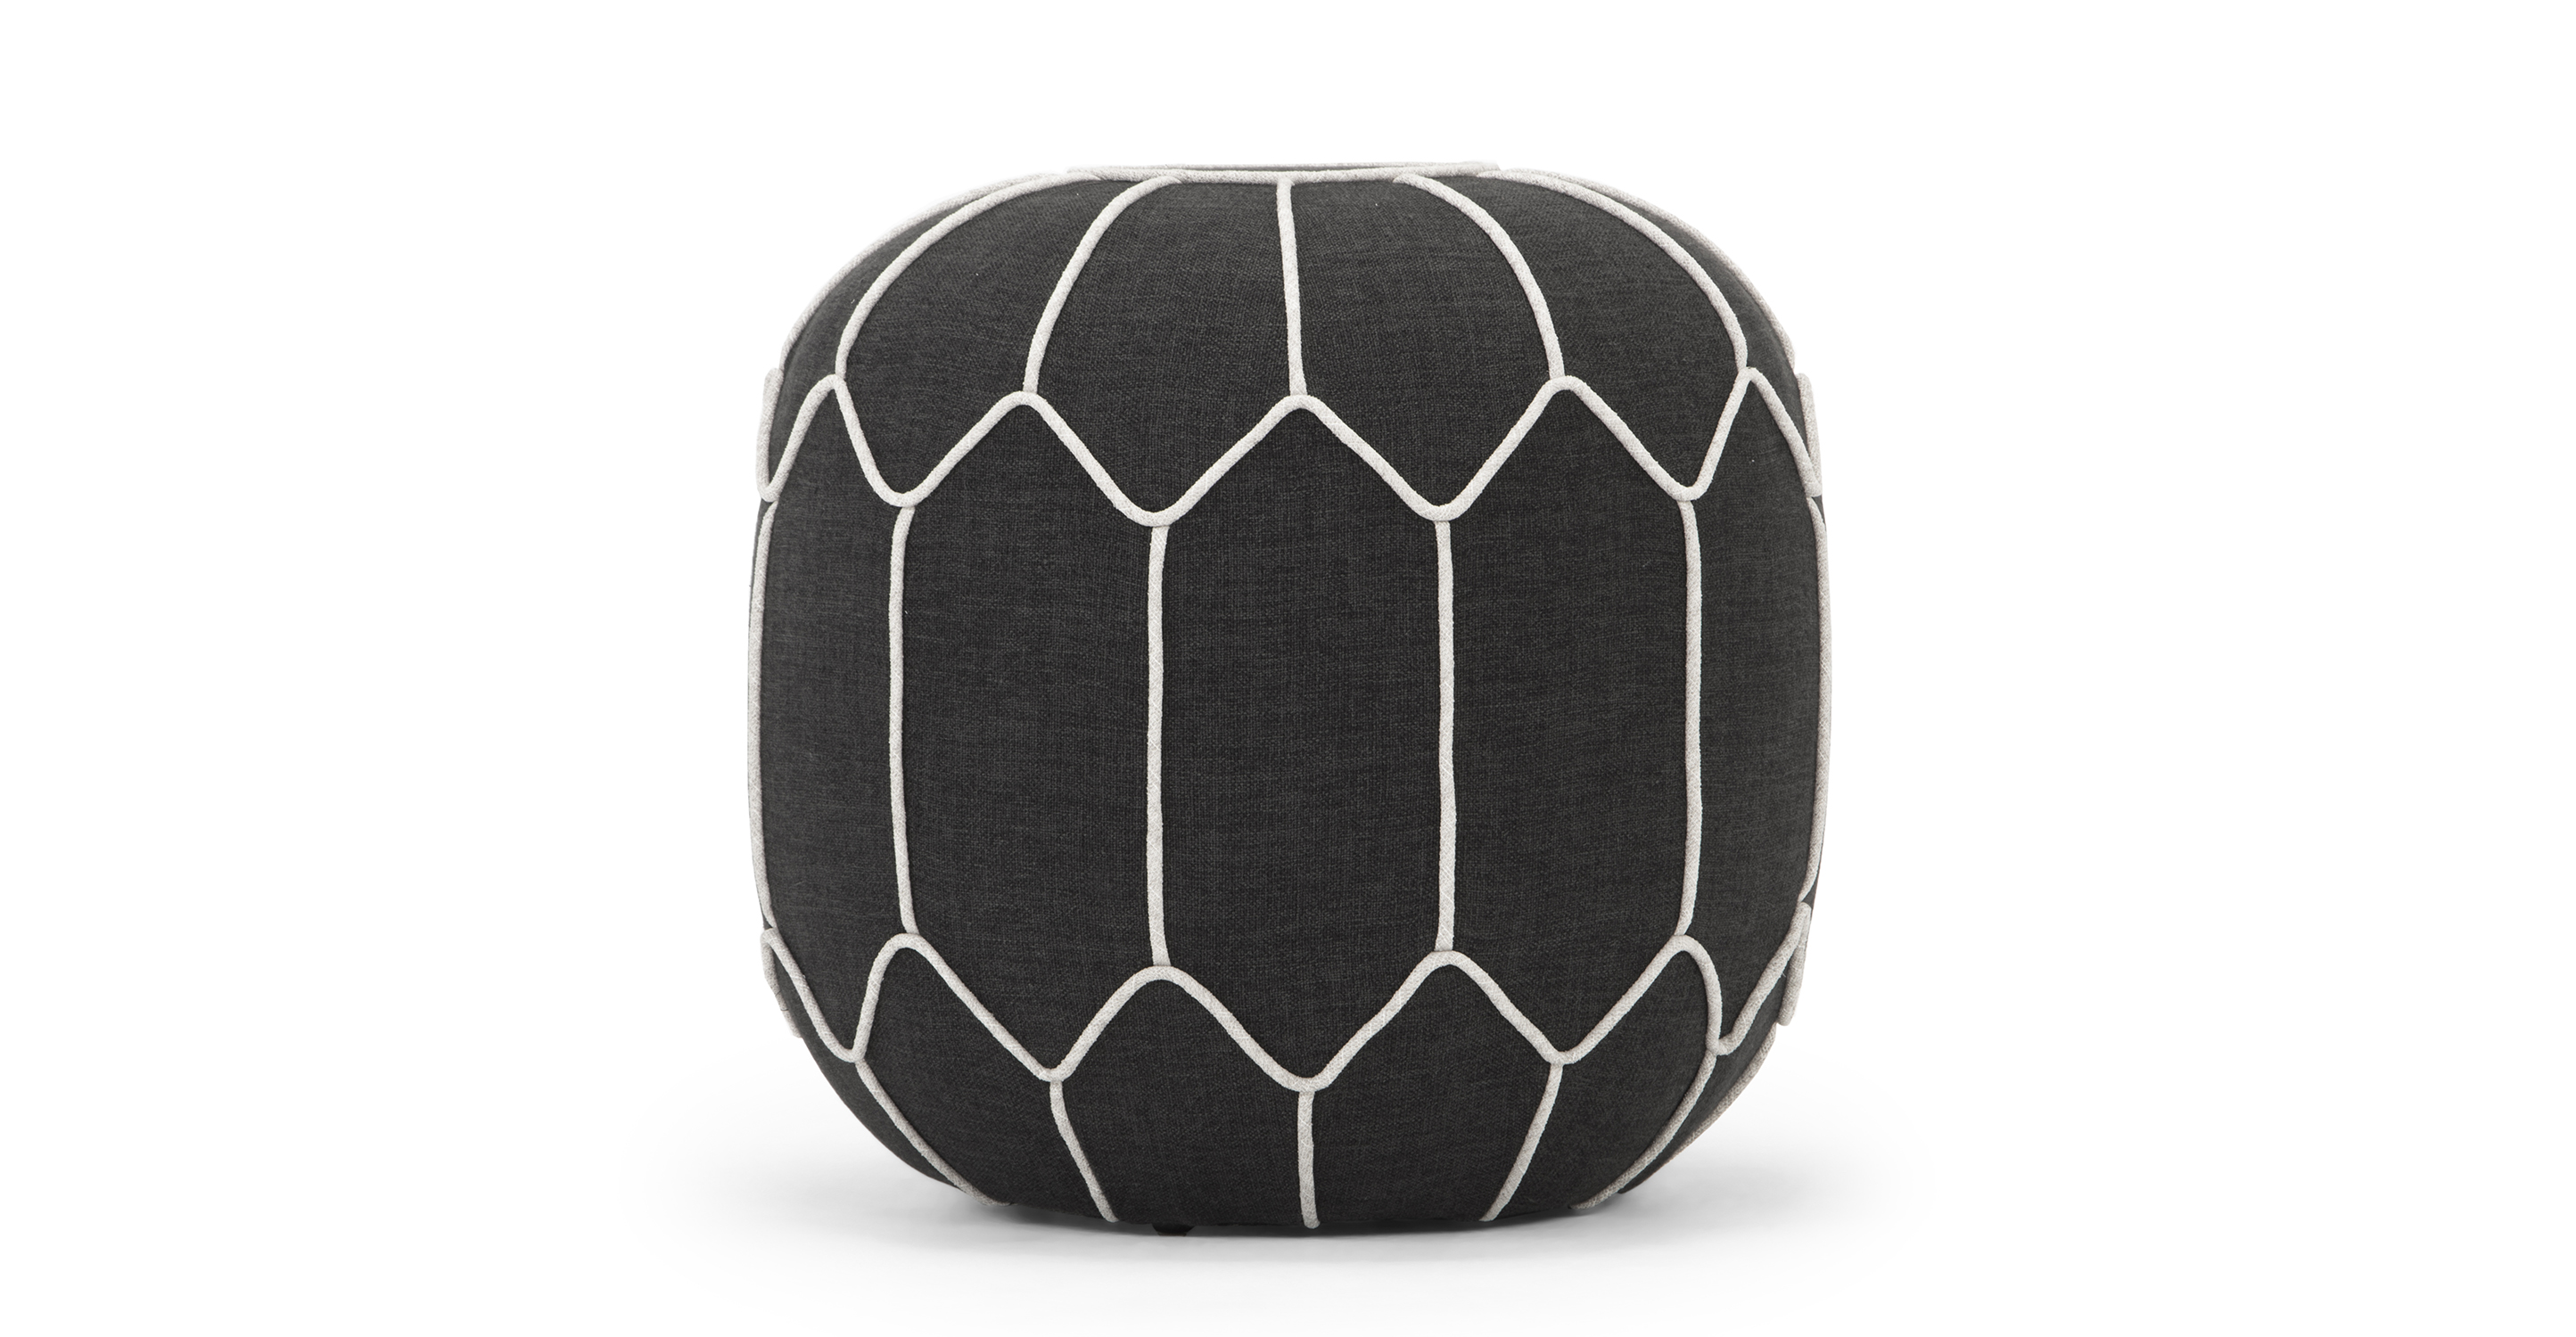 Mosaic Ottoman has a contrasting piping pattern circle at the top of the ottoman in the center. From the circle piping connection lines wrap around the ottoman and join each other, creating an organic pleasing pattern.